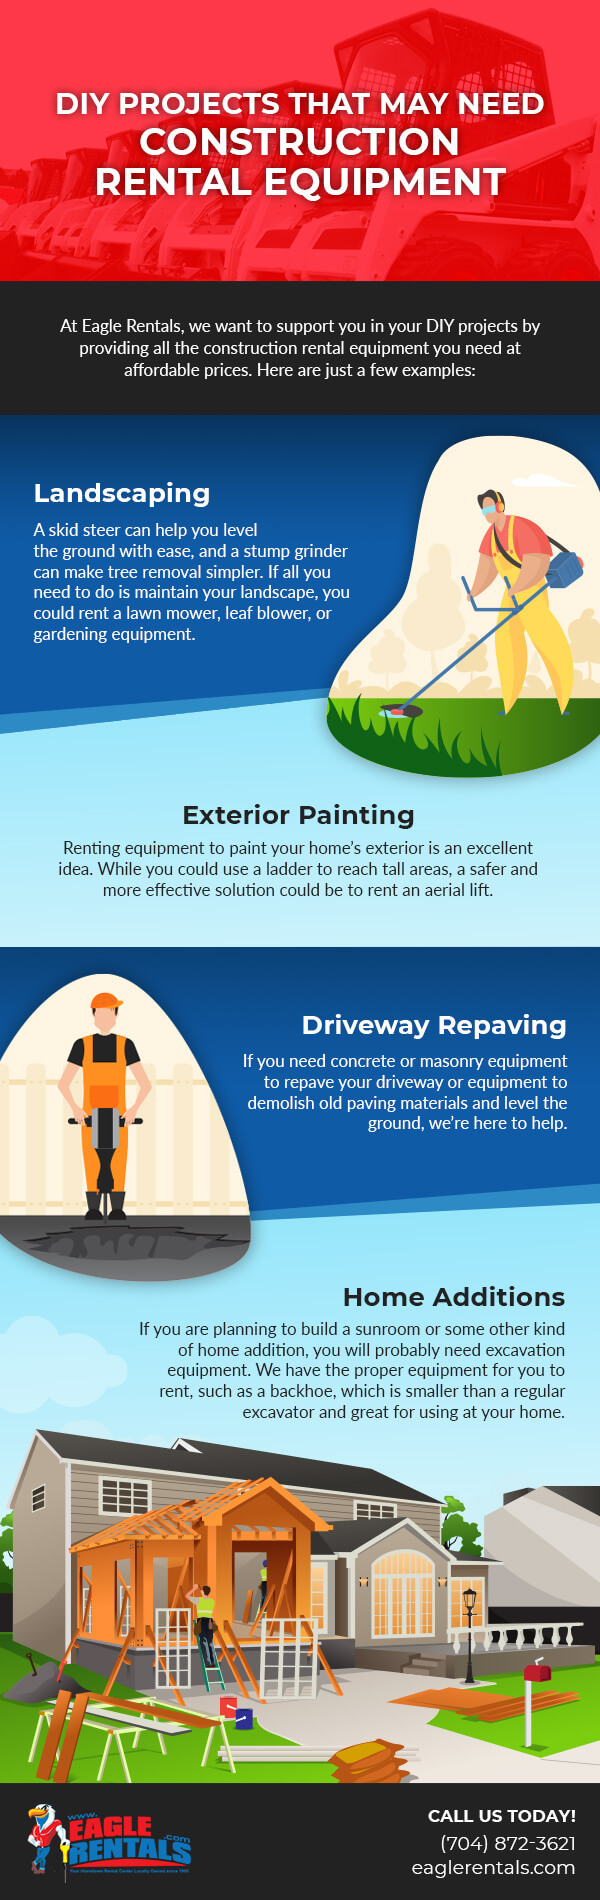 DIY Projects That May Need Construction Rental Equipment 